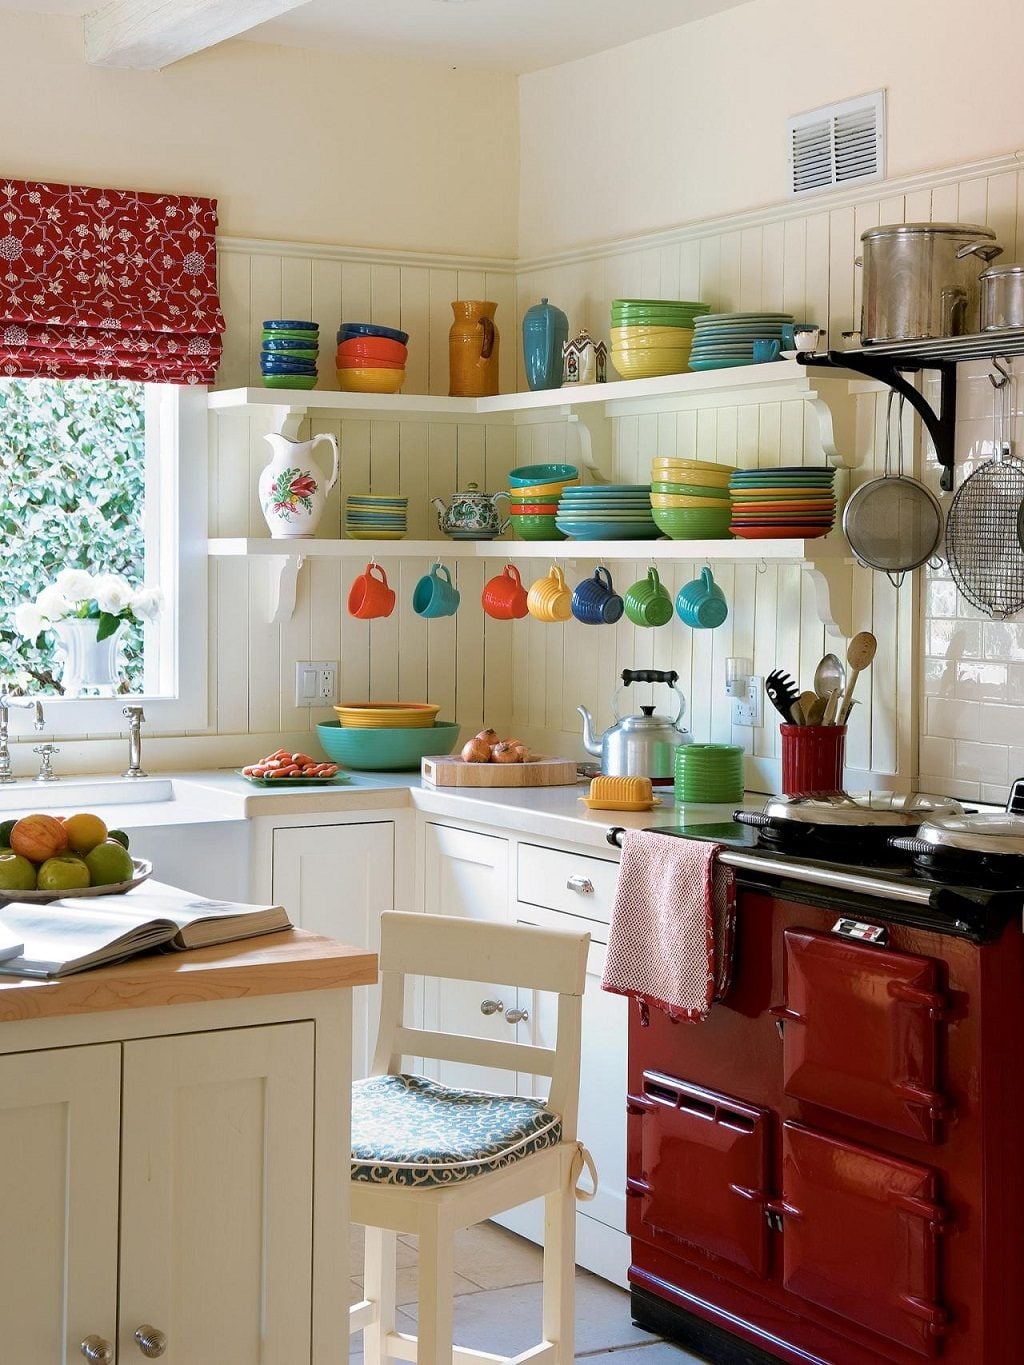 Artistic Small Kitchen Colors Withal Pictures Of Small Kitchen Design Ideas From Hgtv Kitchen Ideas - cigicigi.co